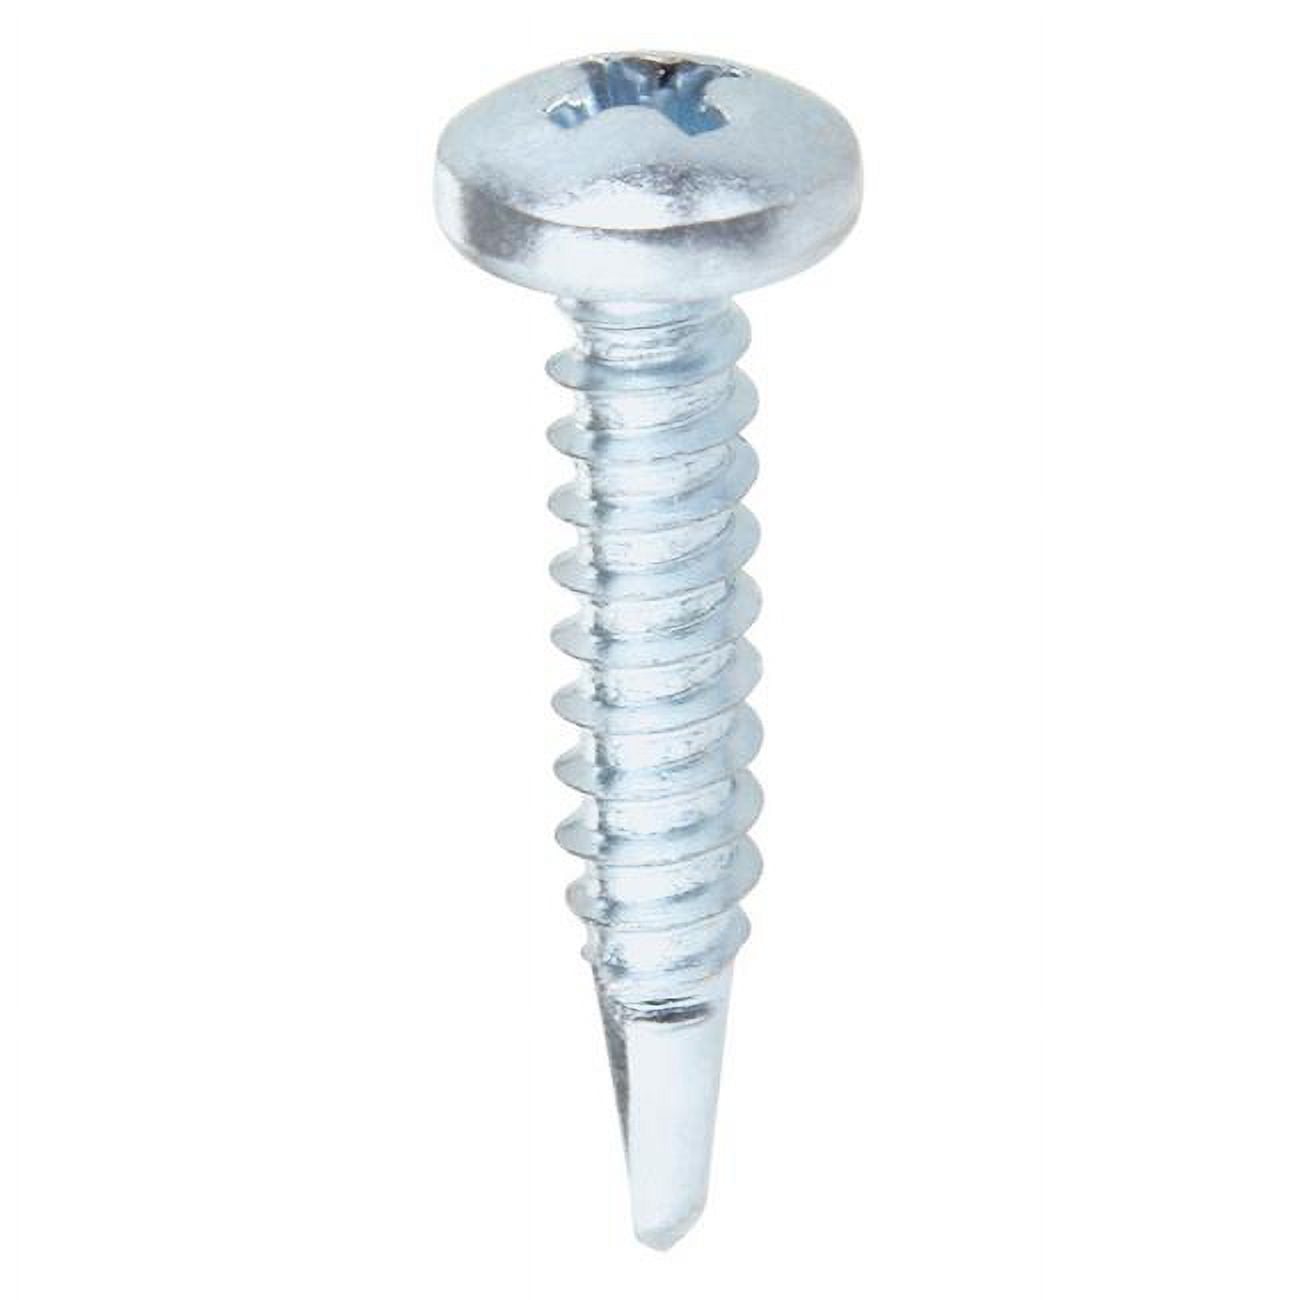 5007713 5 Lbs No.6 X 1.25 In. Phillips Bugle Head Zinc-plated Steel Self-drill Drywall Screws, Pack Of 6